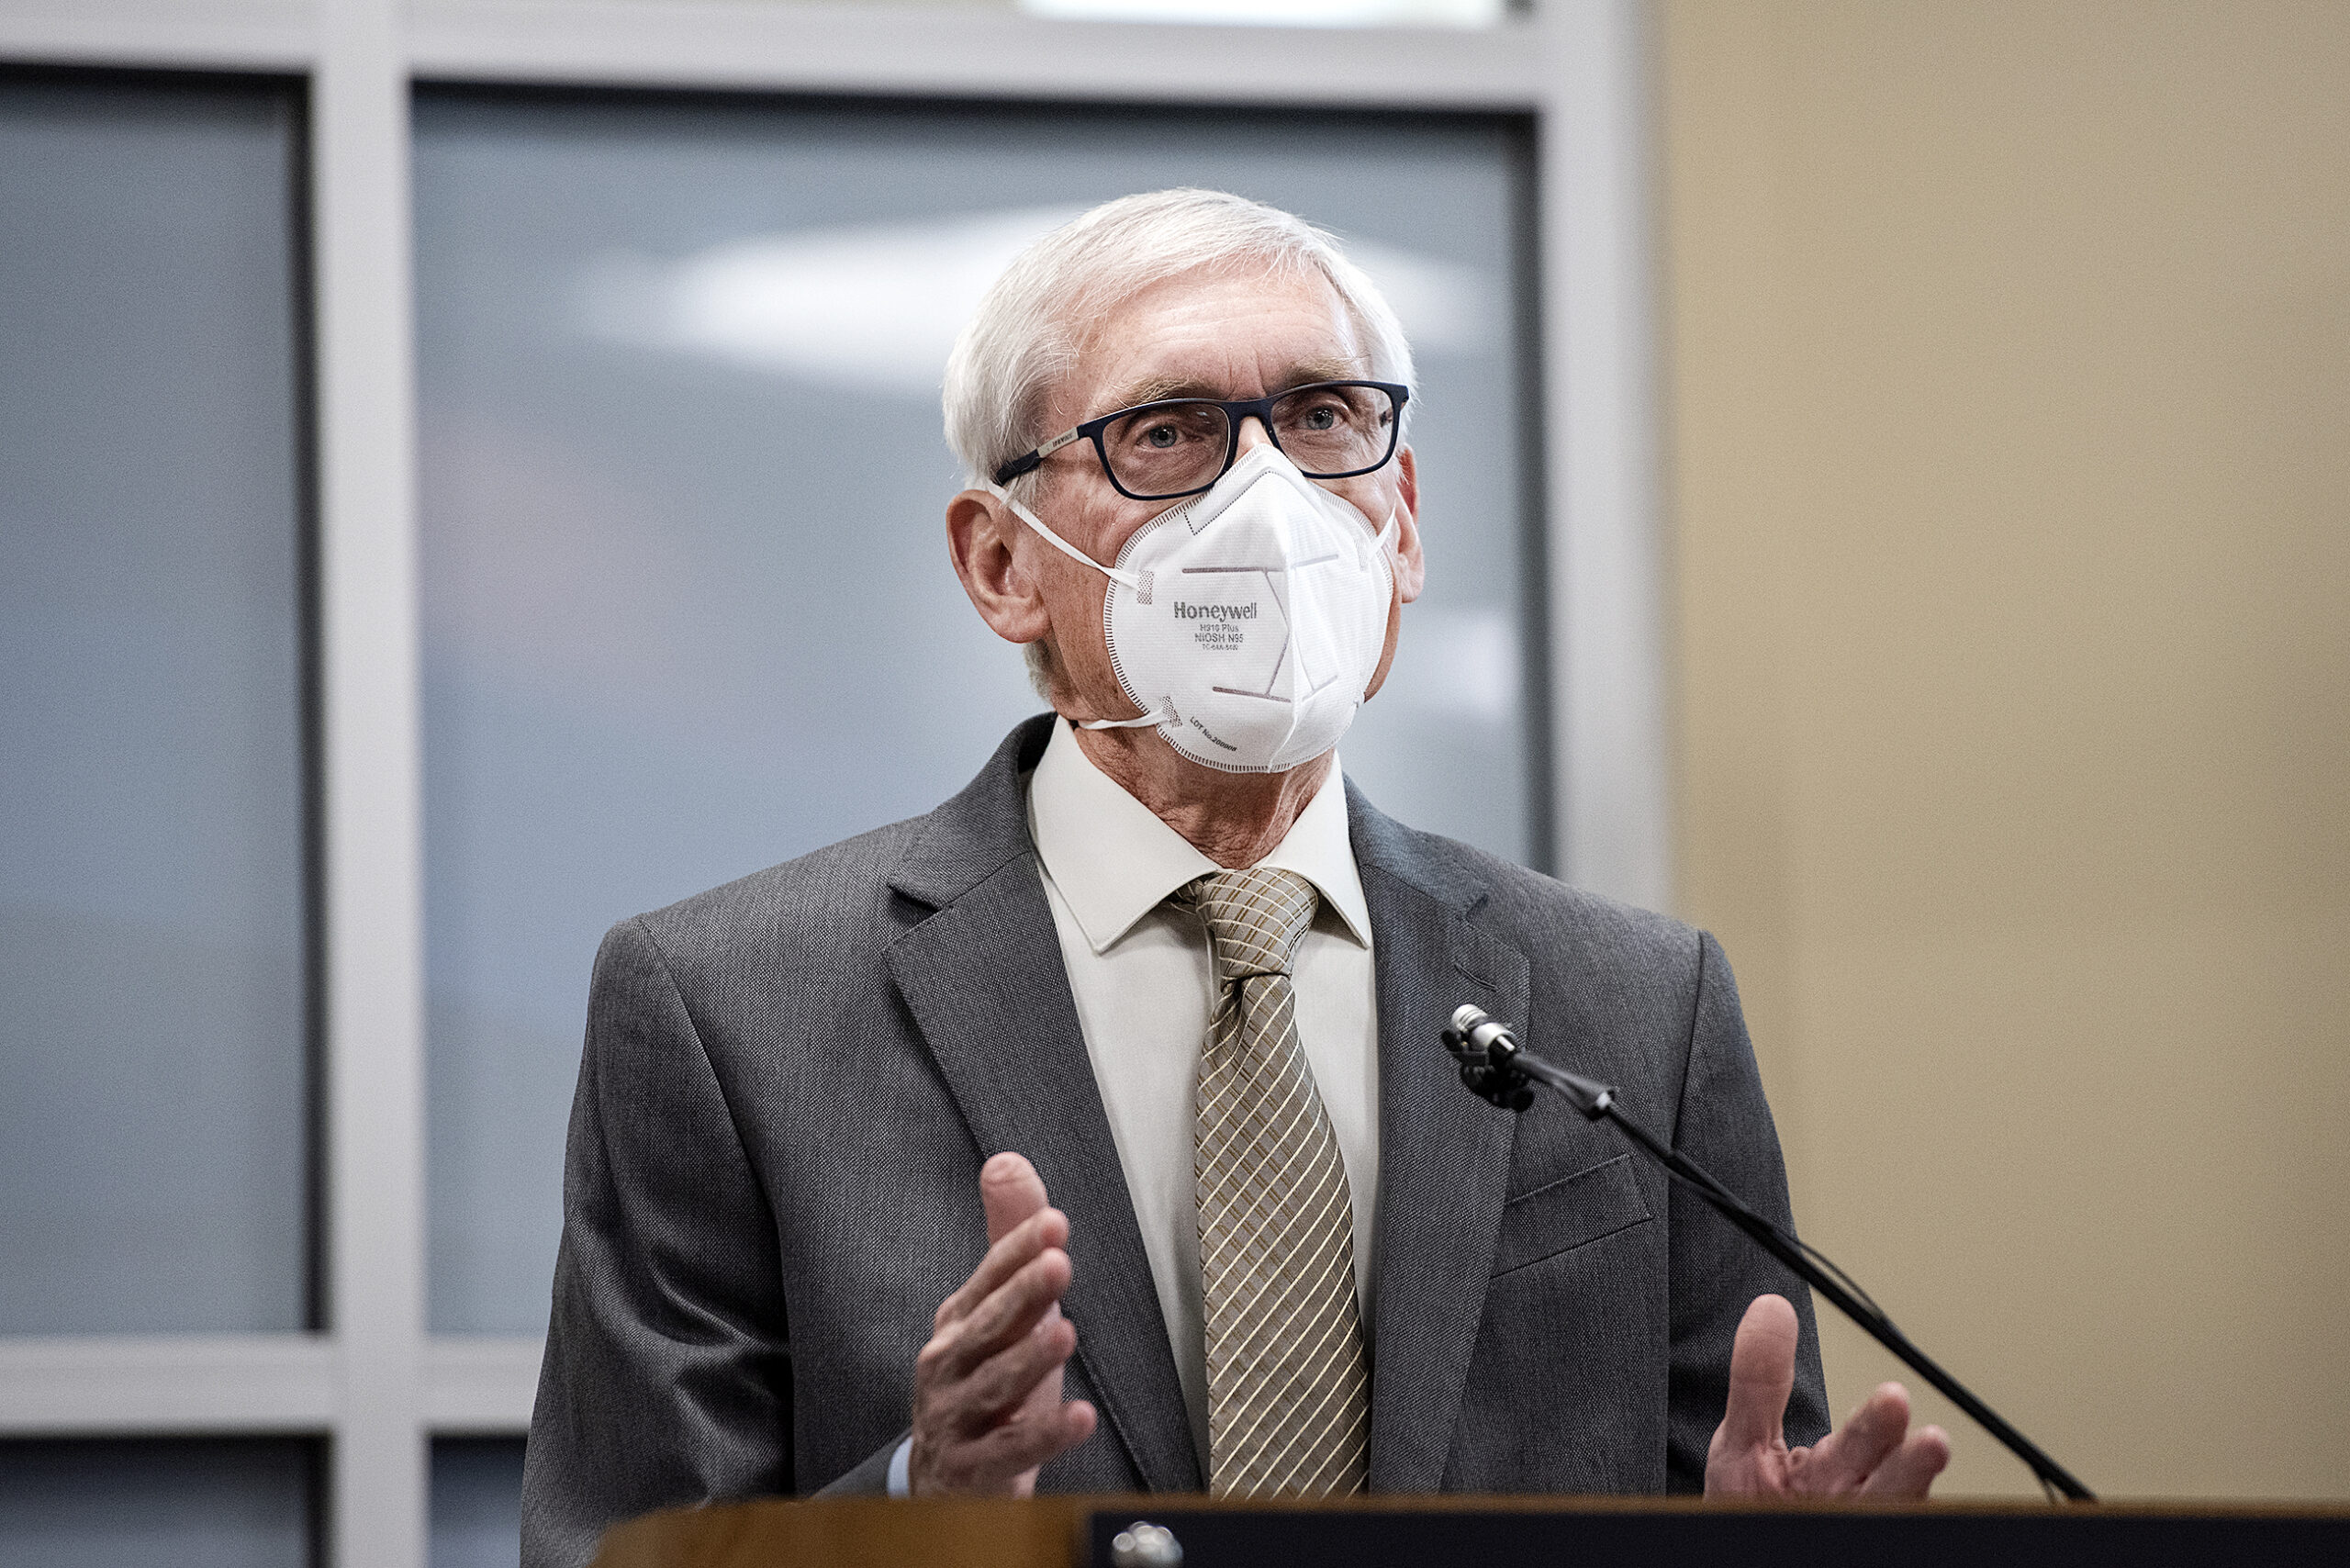 Gov. Evers speaks at a lectern while wearing a white face mask.